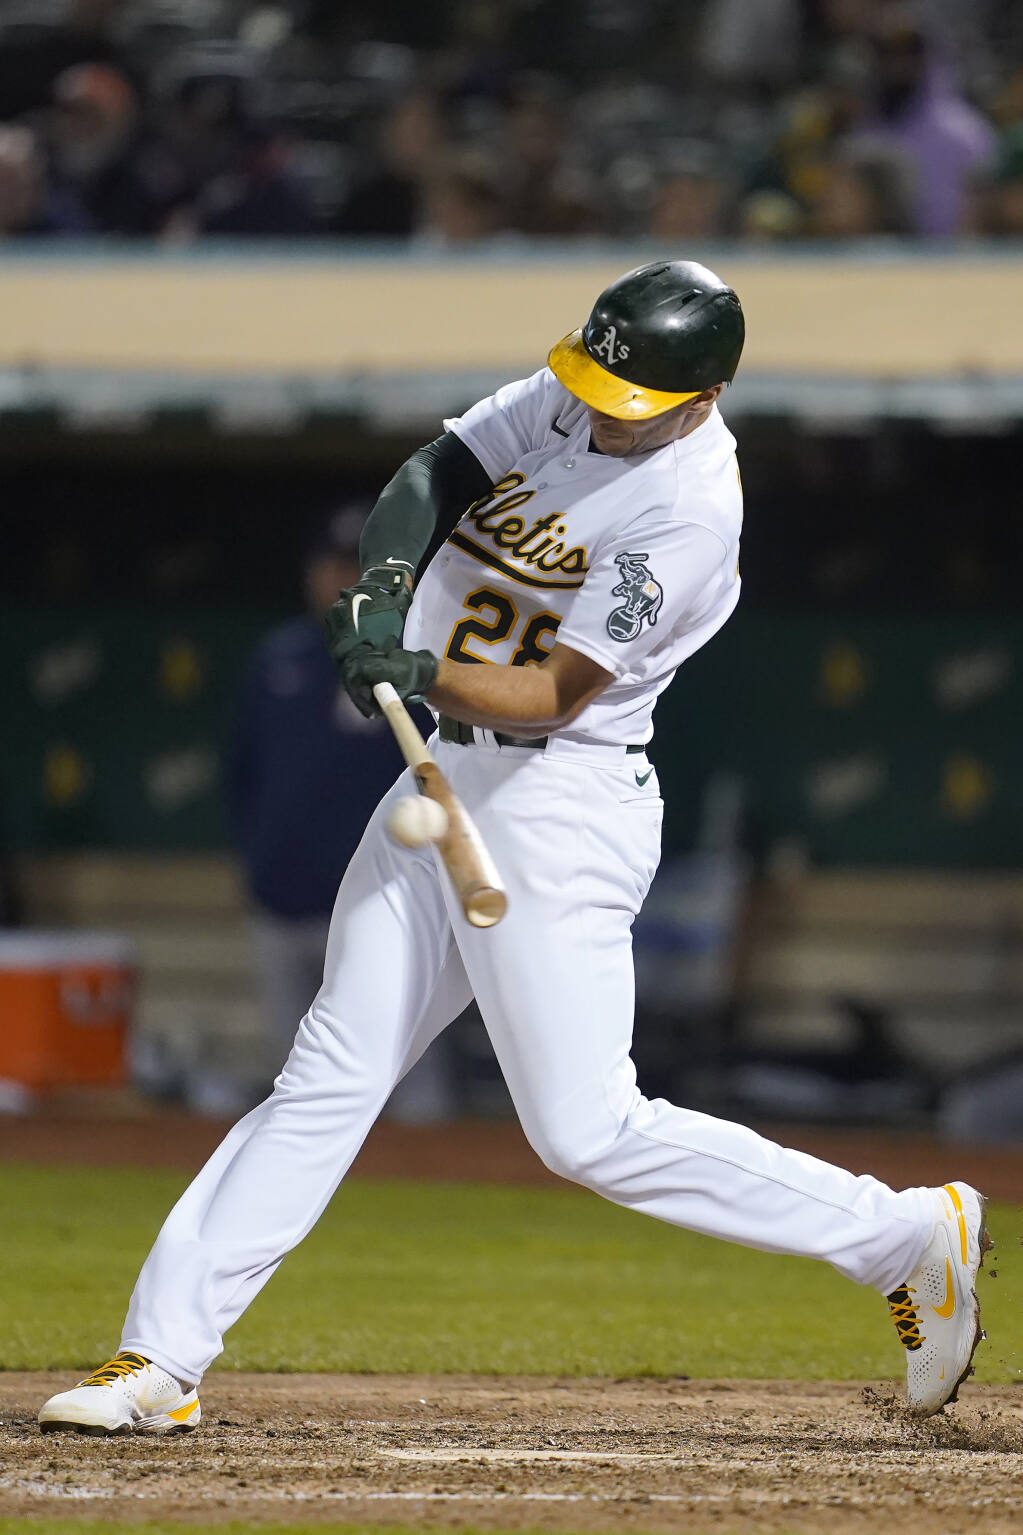 Ramón Laureano suspended 6 games, could miss Giants series